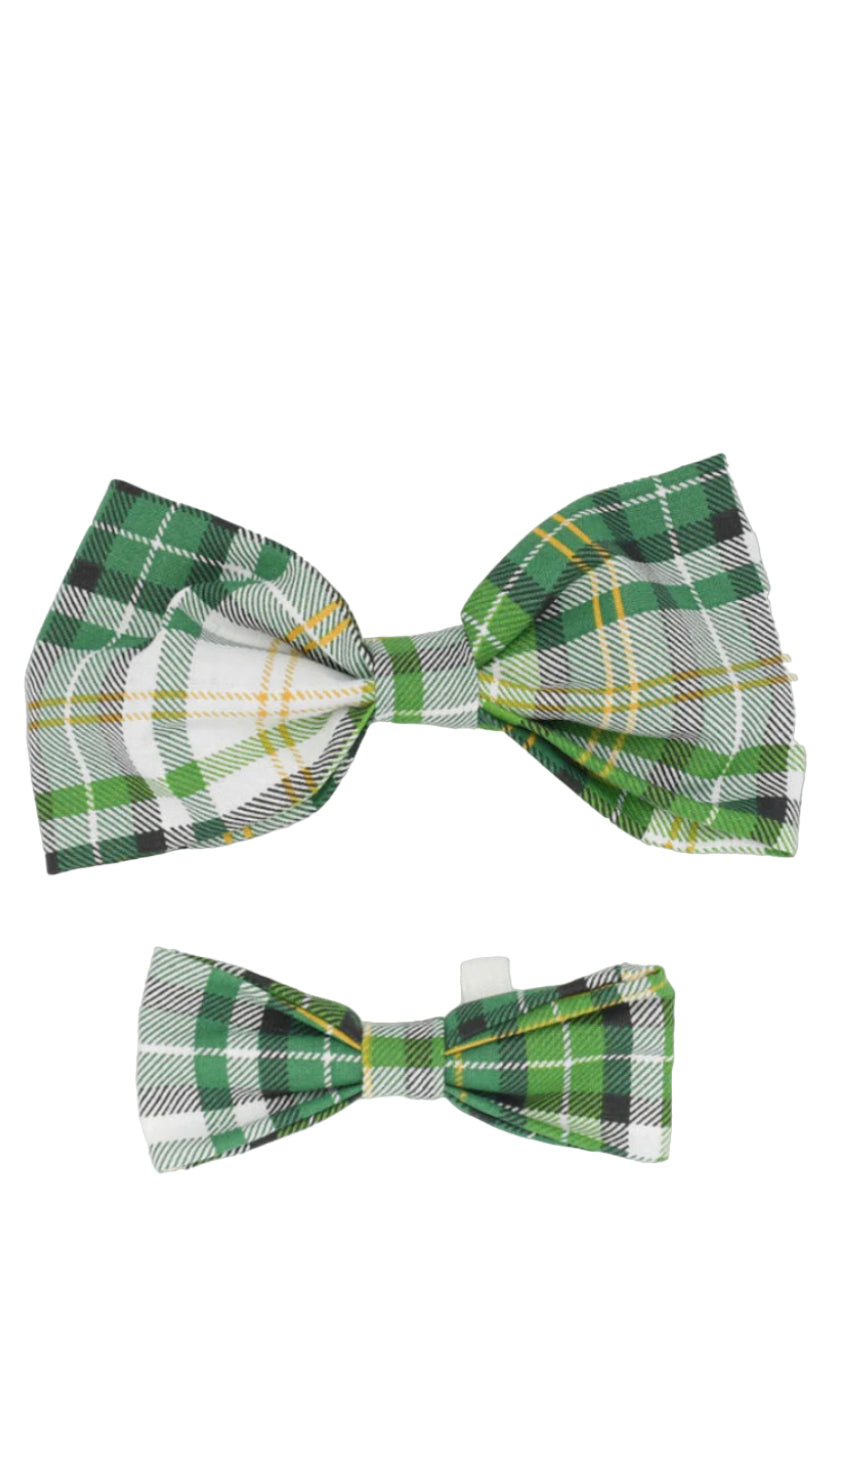 Flannel Chartreuse Bowtie